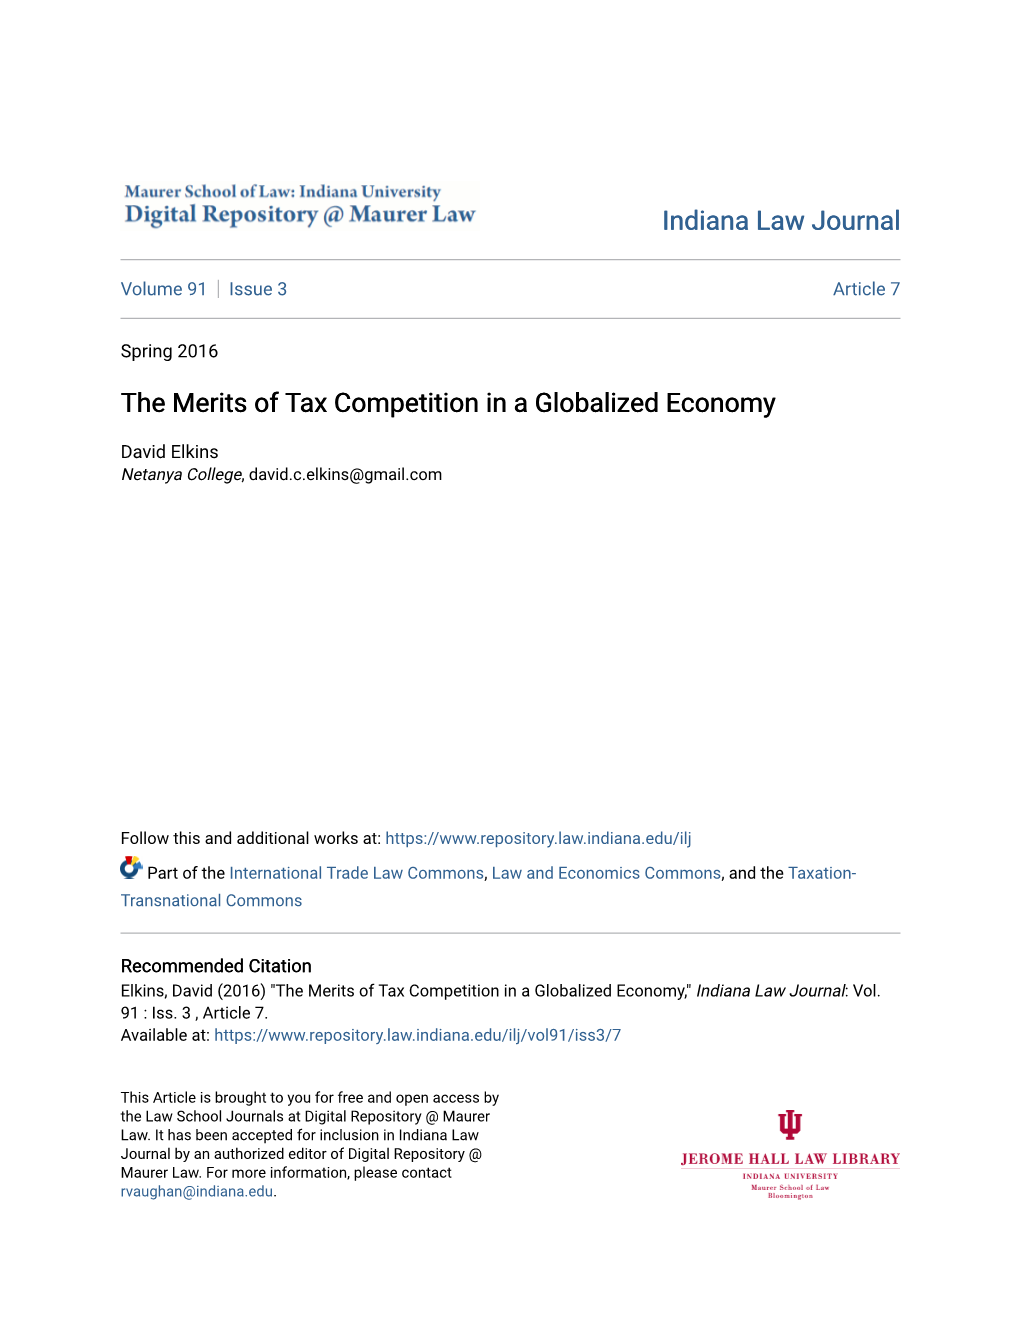 The Merits of Tax Competition in a Globalized Economy